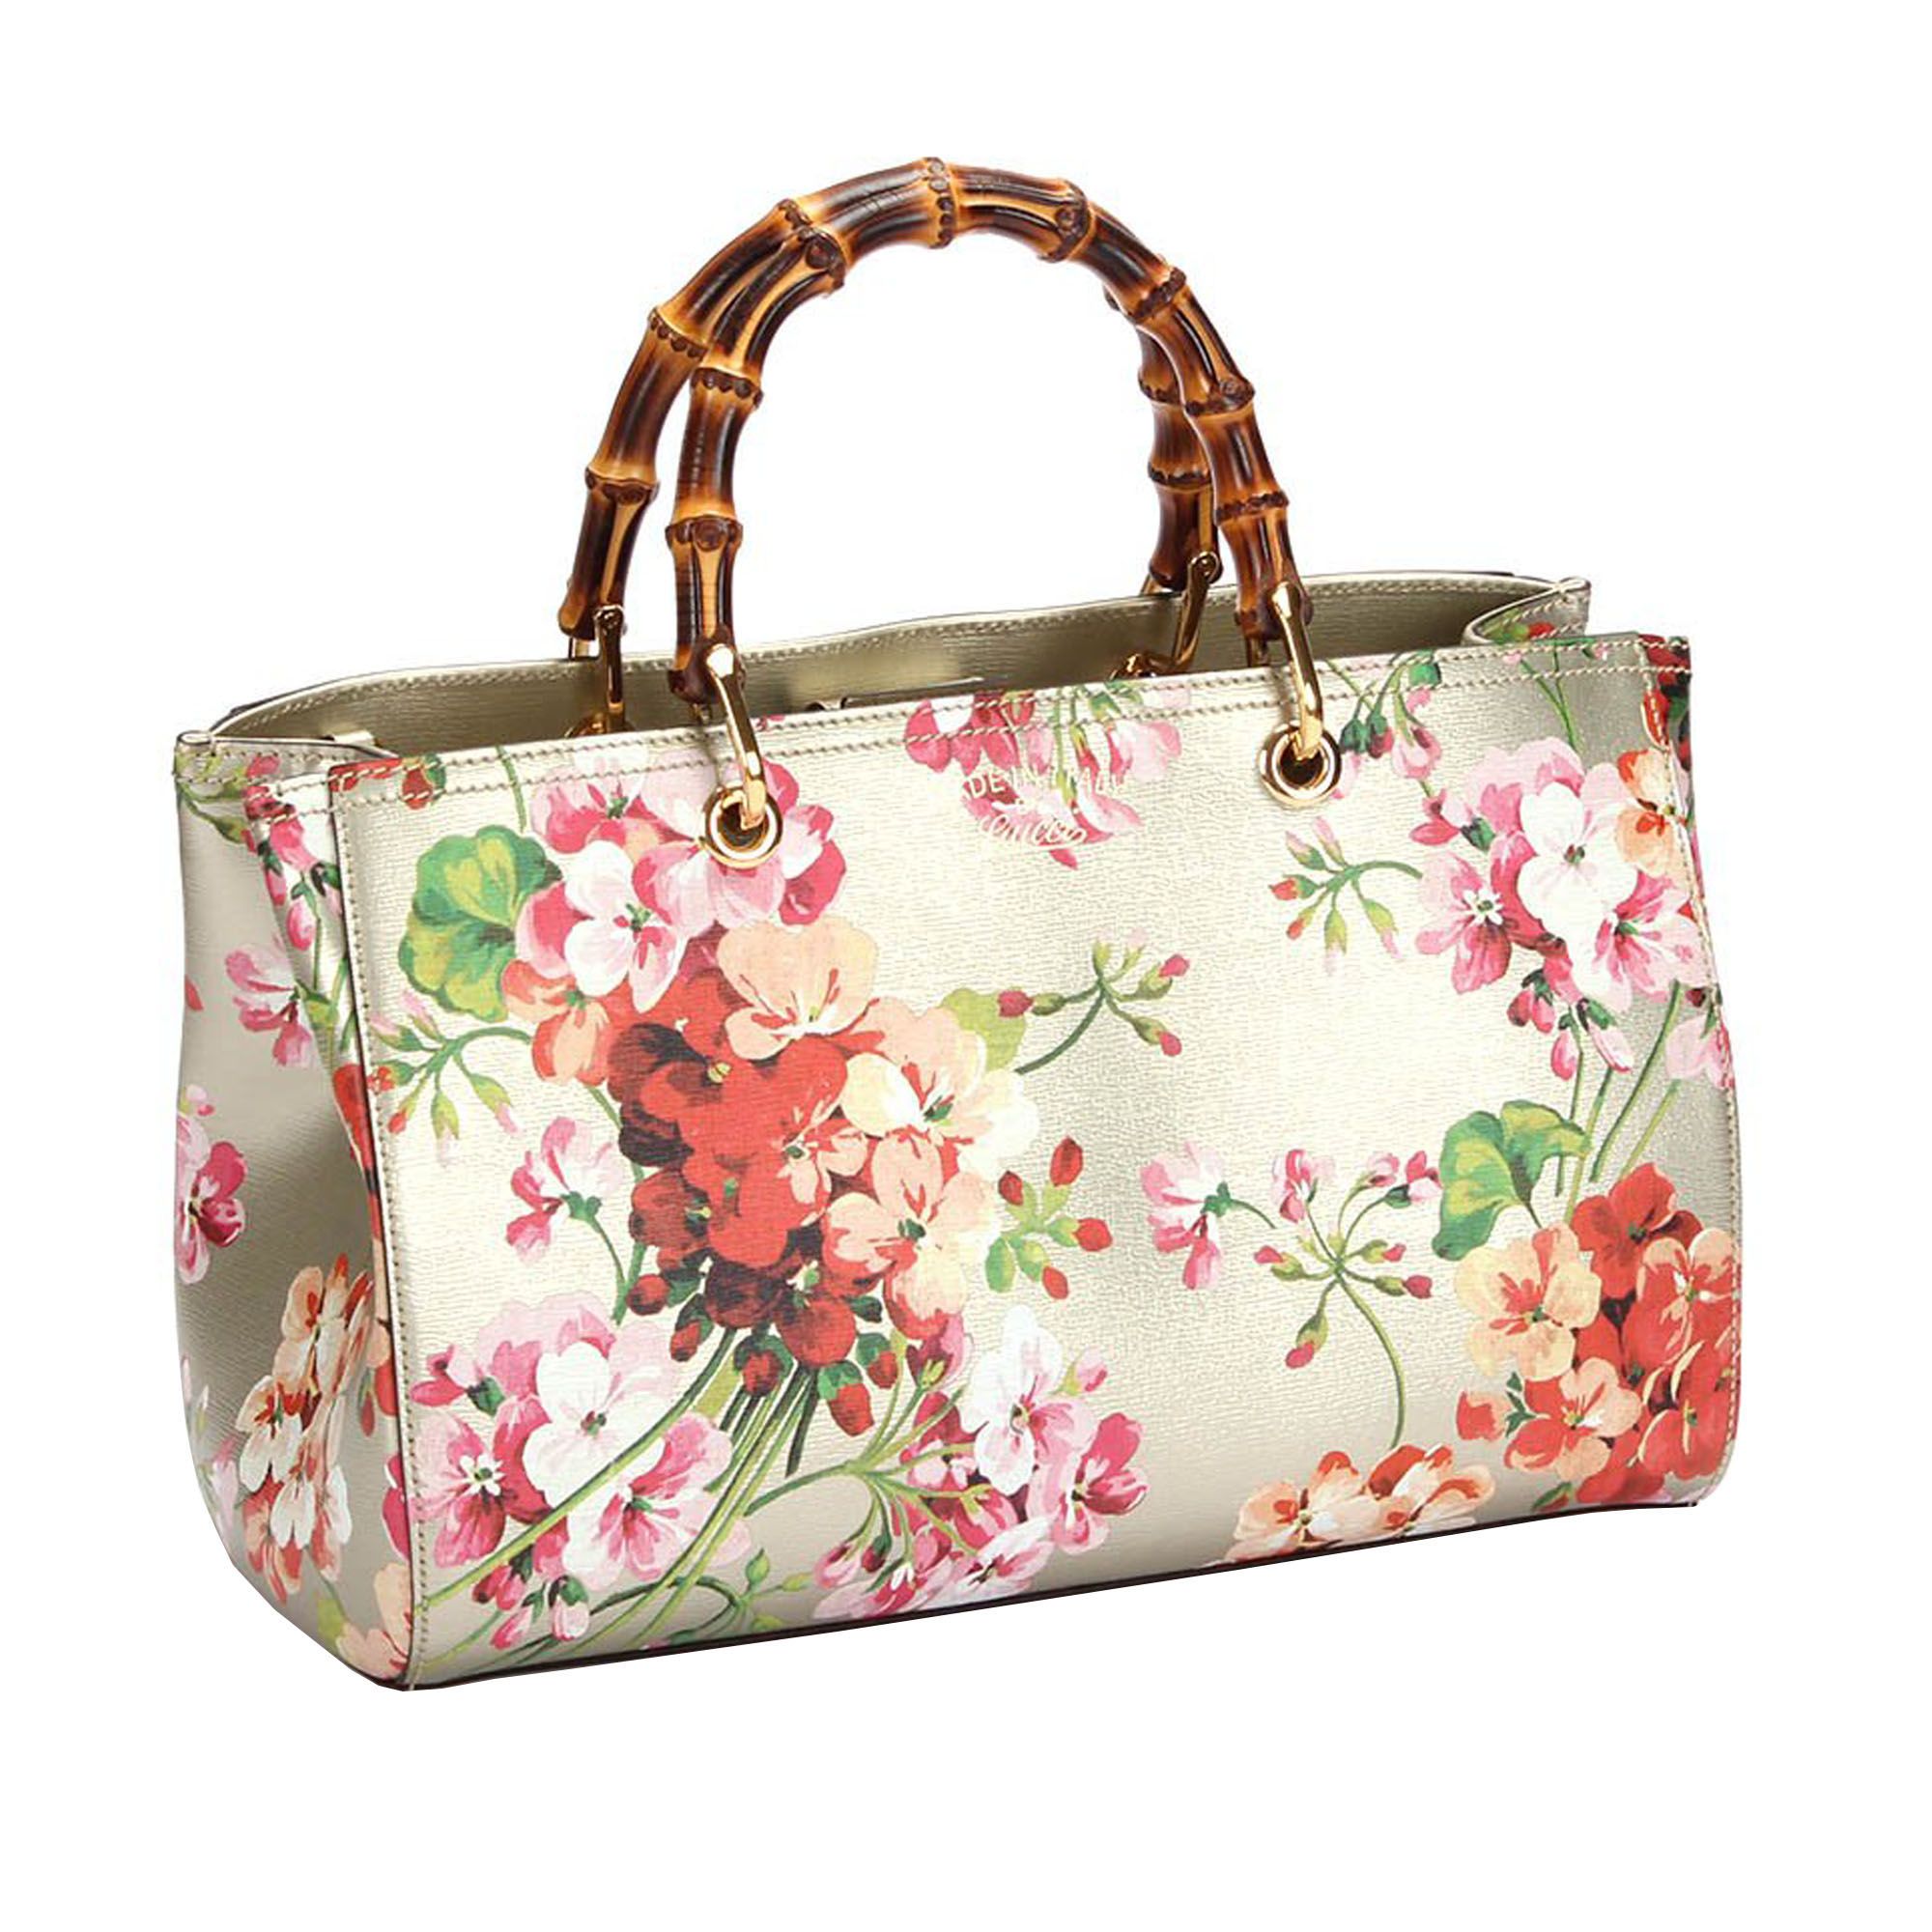 VINTAGE. RRP AS NEW. The Blooms Bamboo Shopper features a floral printed leather body, bamboo handles, a detachable flat strap, an open top with a magnetic closure, and interior zip and slip pockets.Exterior bottom is scratched. Studs is scratched.

Dimensions:
Length 21cm
Width 23cm
Depth 11.5cm
Hand Drop 10cm
Shoulder Drop 48cm

Original Accessories: Shoulder Strap, Dust Bag

Serial Number: 323660 001998
Color: White x Multi
Material: Leather x Calf x Natural Material x Bamboo
Country of Origin: ITALY
Boutique Reference: SSU115051K1342


Product Rating: VeryGoodCondition